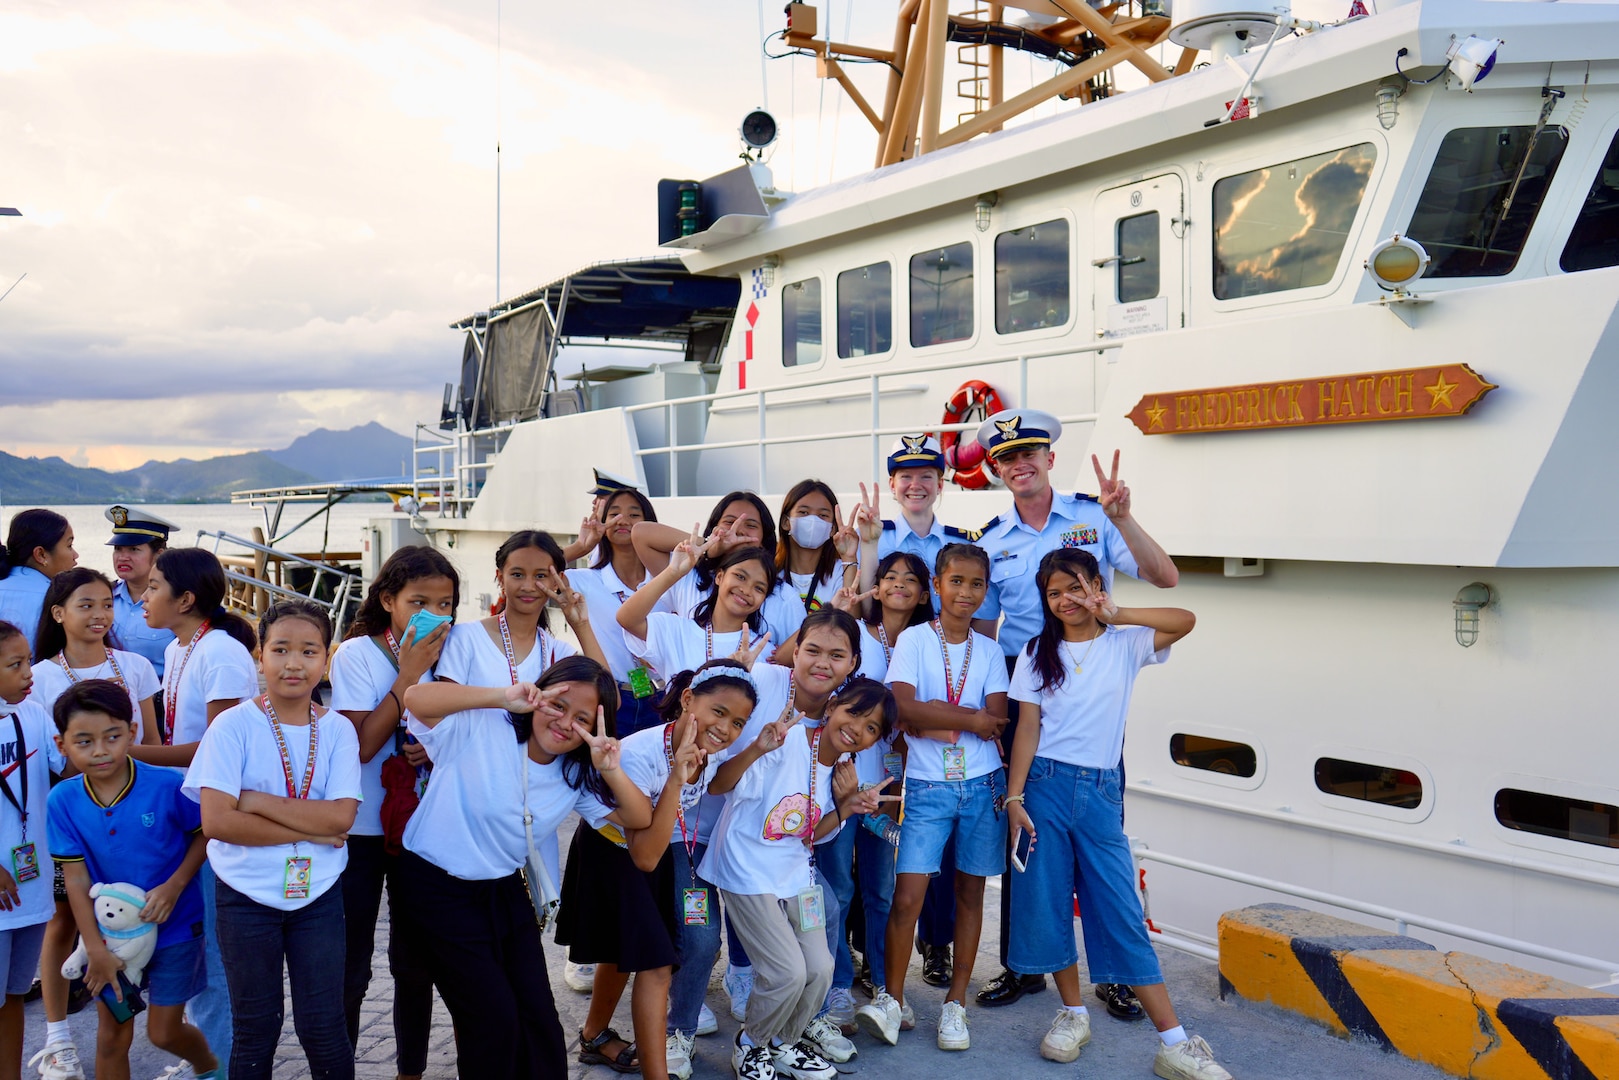 The USCGC Frederick Hatch (WPC 1143) crew hosts students from the Philippine National Police in Tacloban, Philippines, on Oct. 20, 2023. The crew successfully concluded a routine 47-day expeditionary patrol covering more than 8,200 nautical miles under Operation Blue Pacific, returning to Guam on Thanksgiving, distinguished by a series of historic and strategic engagements across the Western Pacific and Oceania. The Frederick Hatch is the 43rd 154-foot Sentinel-class fast response cutter named for a surfman and lighthouse keeper who was a two-time Gold Life Saving Medal recipient. They regularly patrol Oceania, fostering international cooperation and supporting maritime safety, security, and stewardship. (U.S Coast Guard photo)